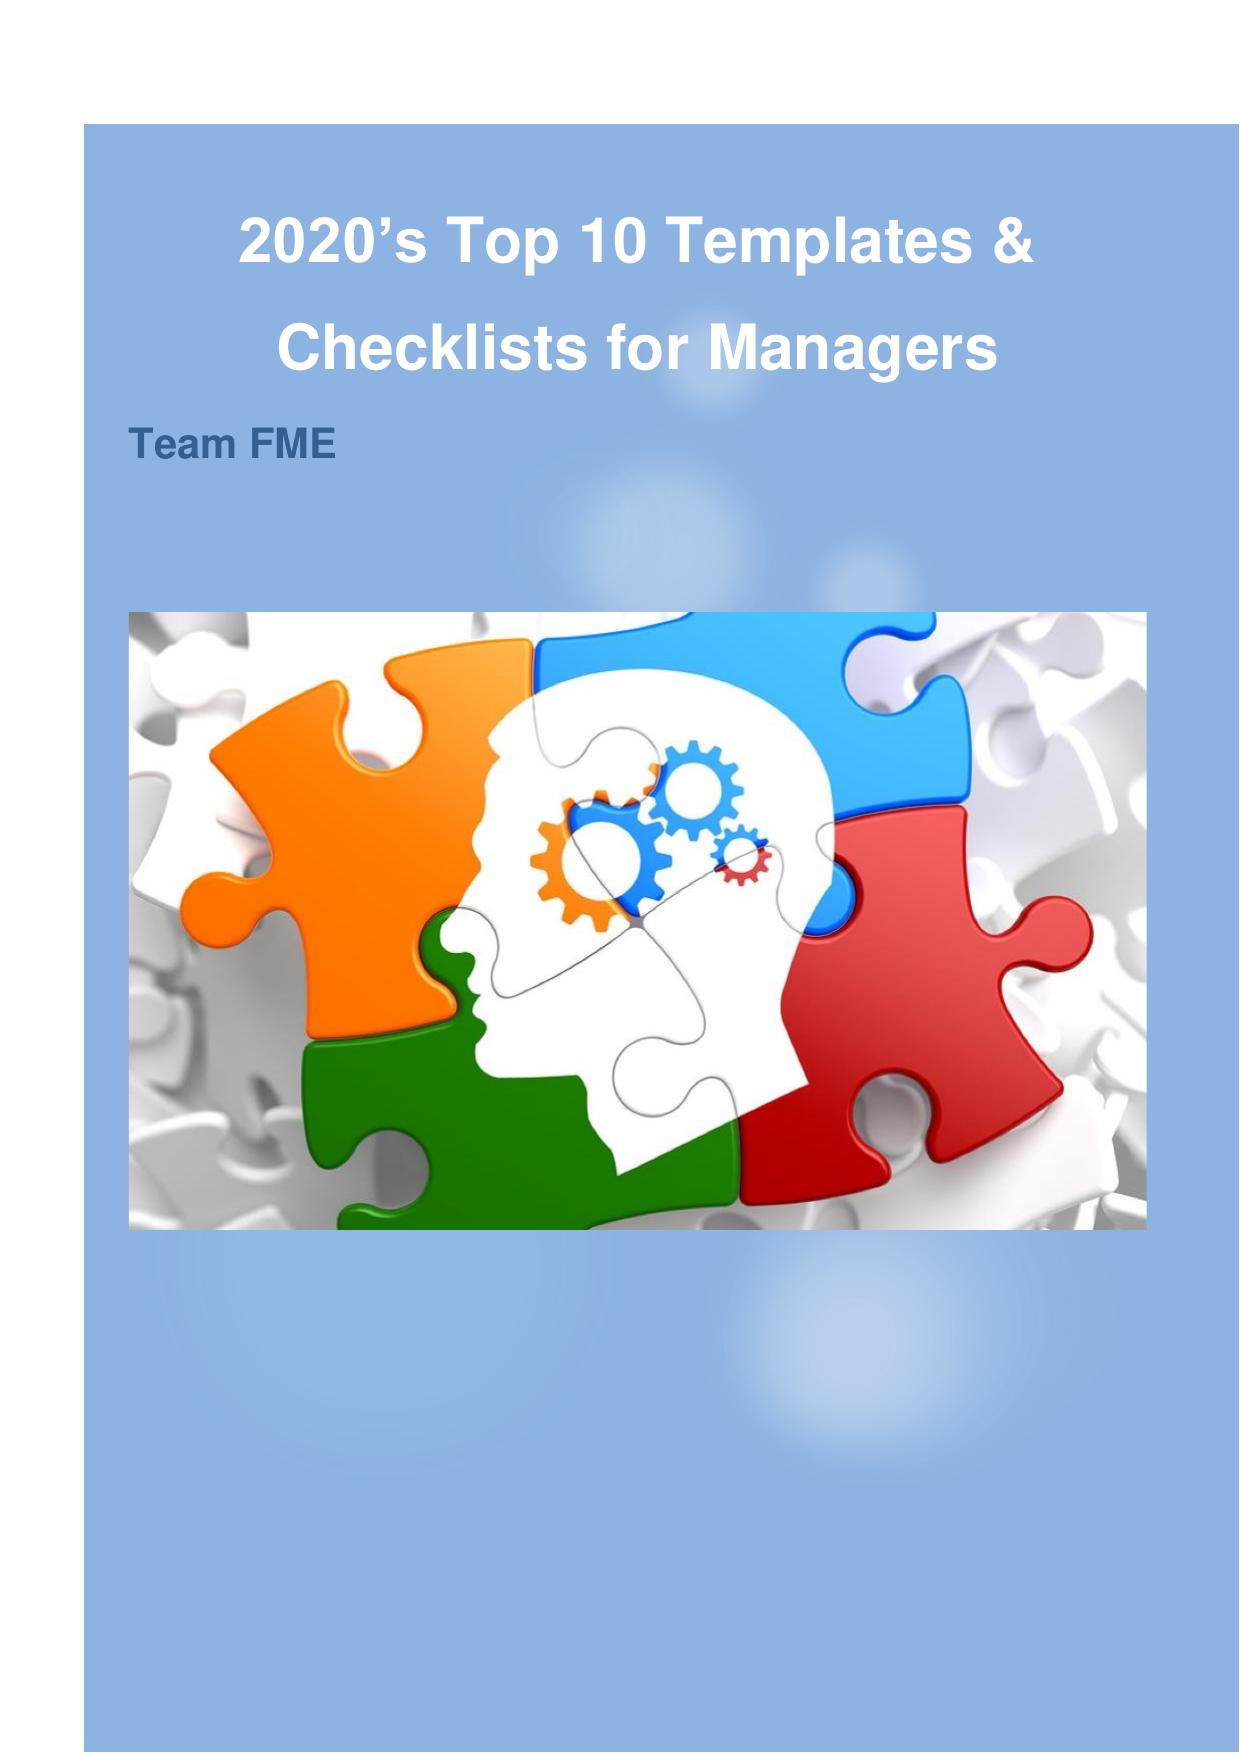 2020's Top 10 Templates and Checklists for Managers